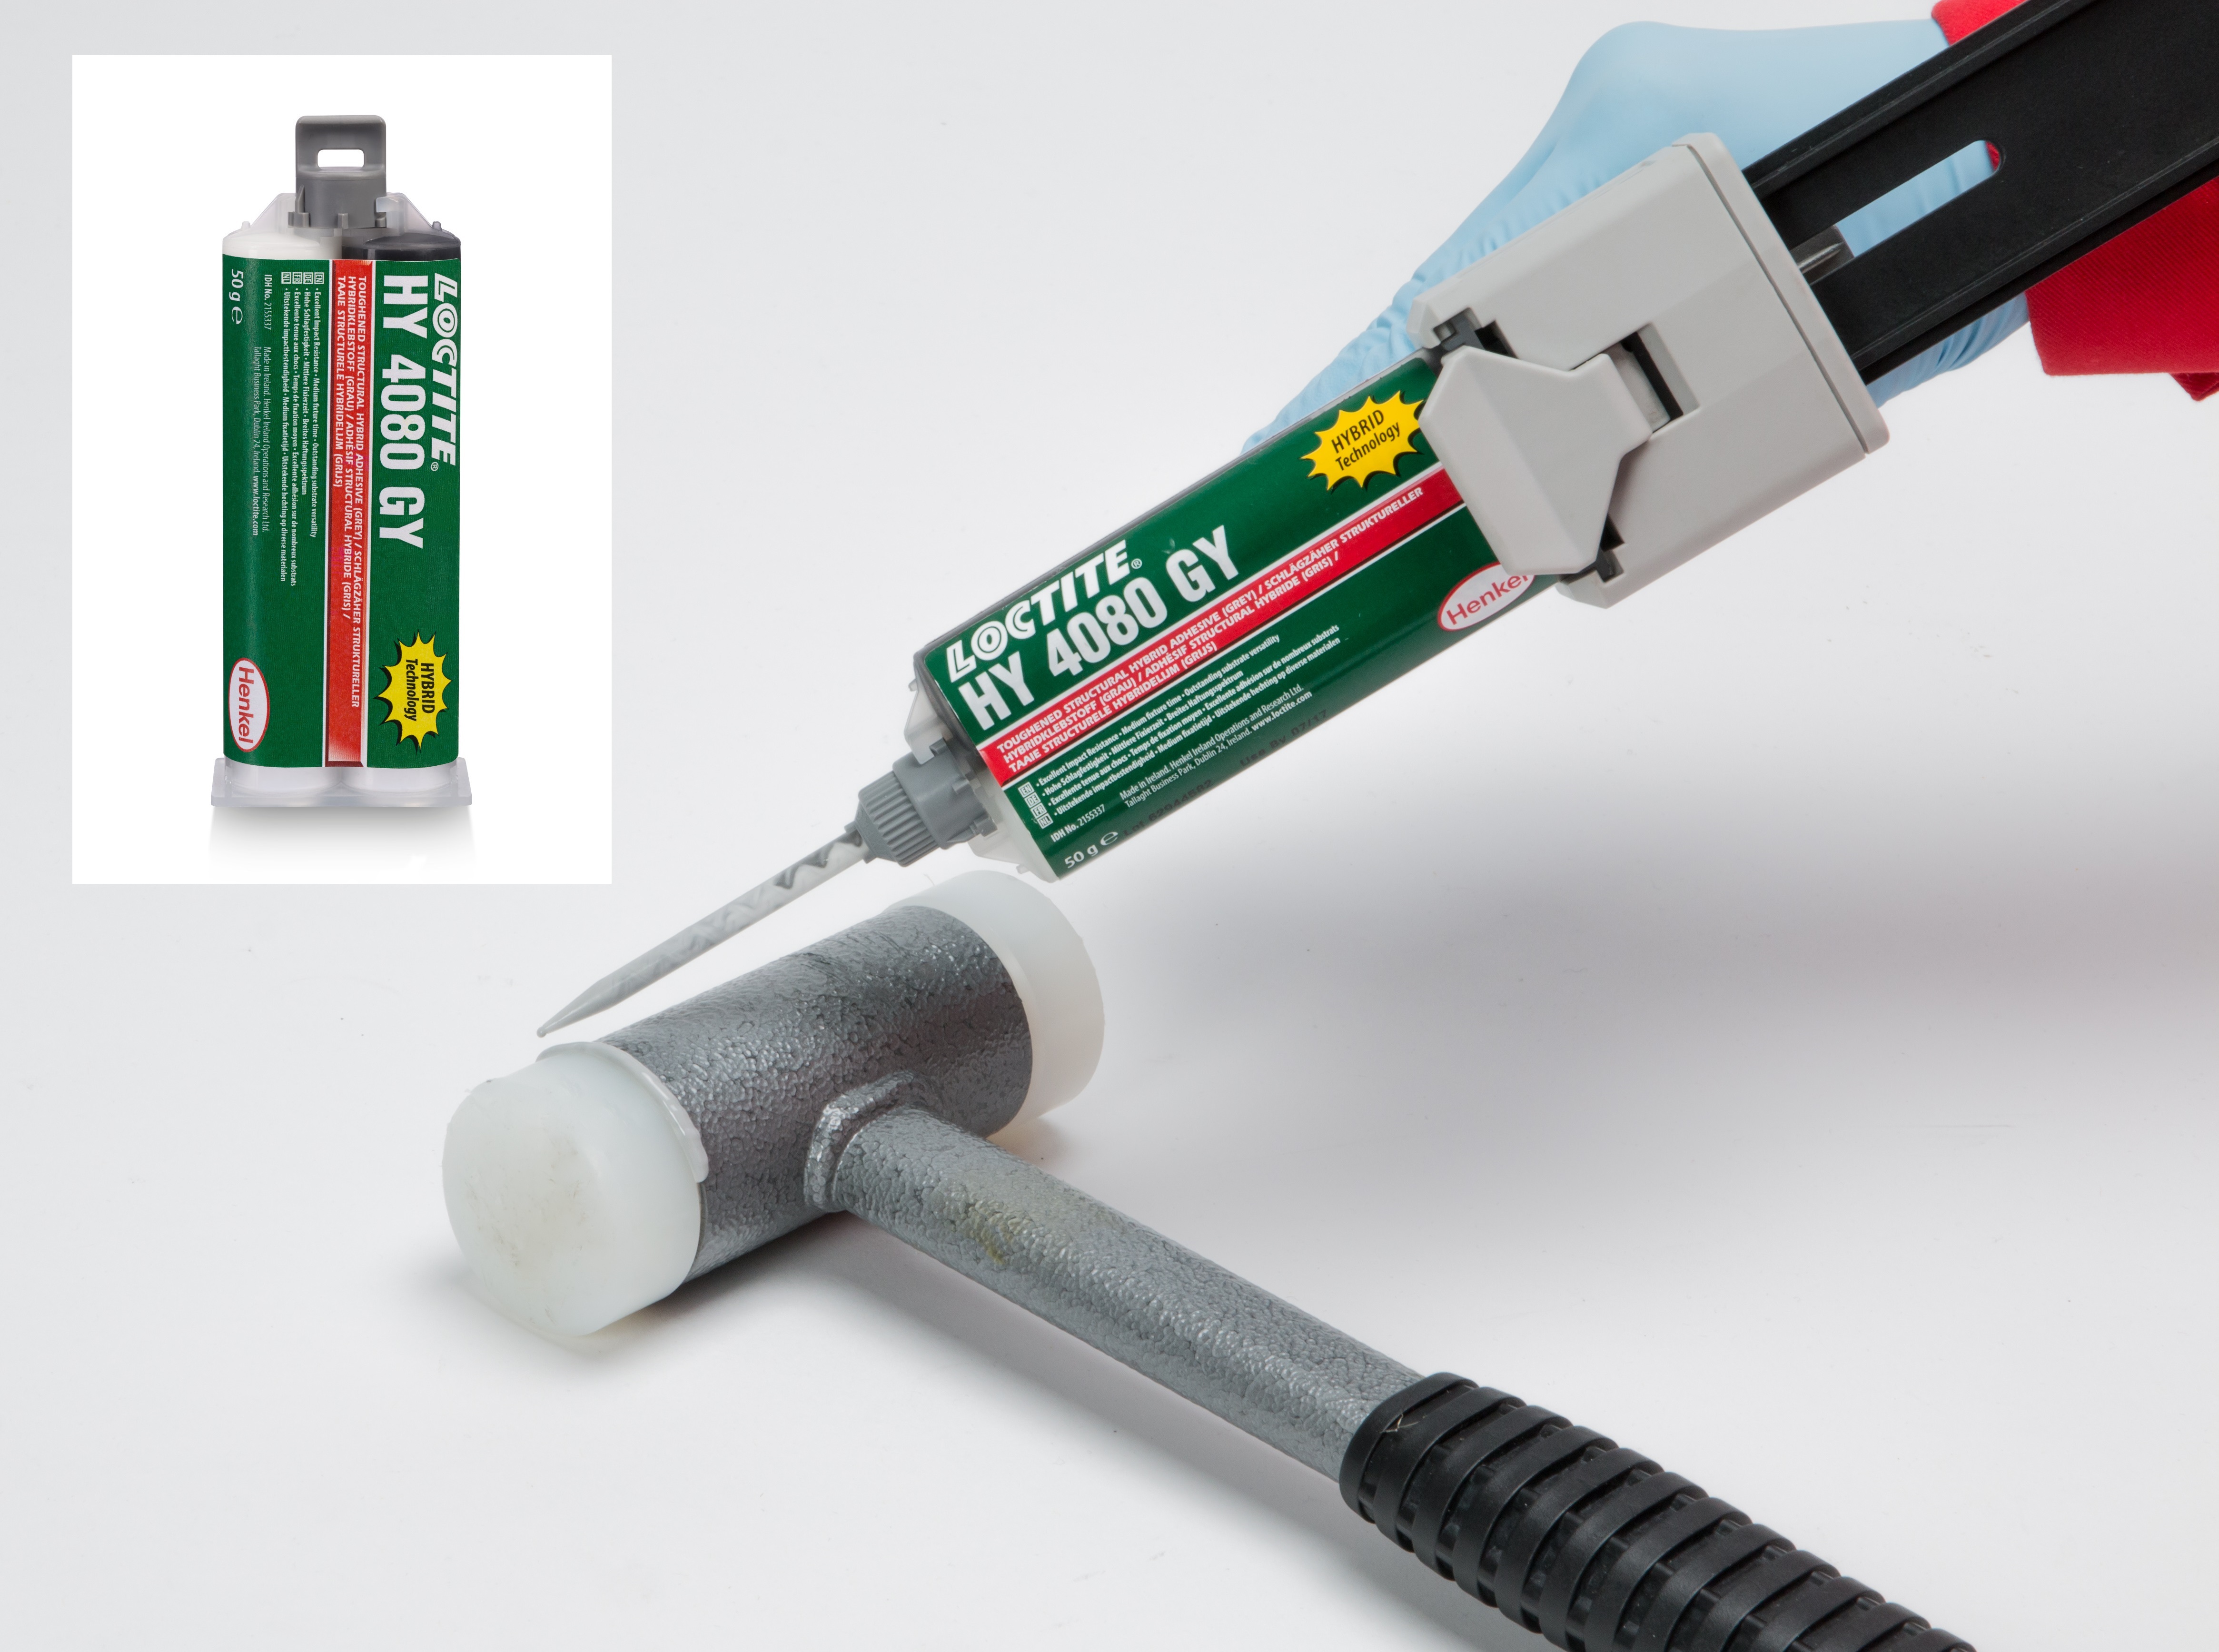 Loctite hybrid adhesive widens the scope of structural bonders